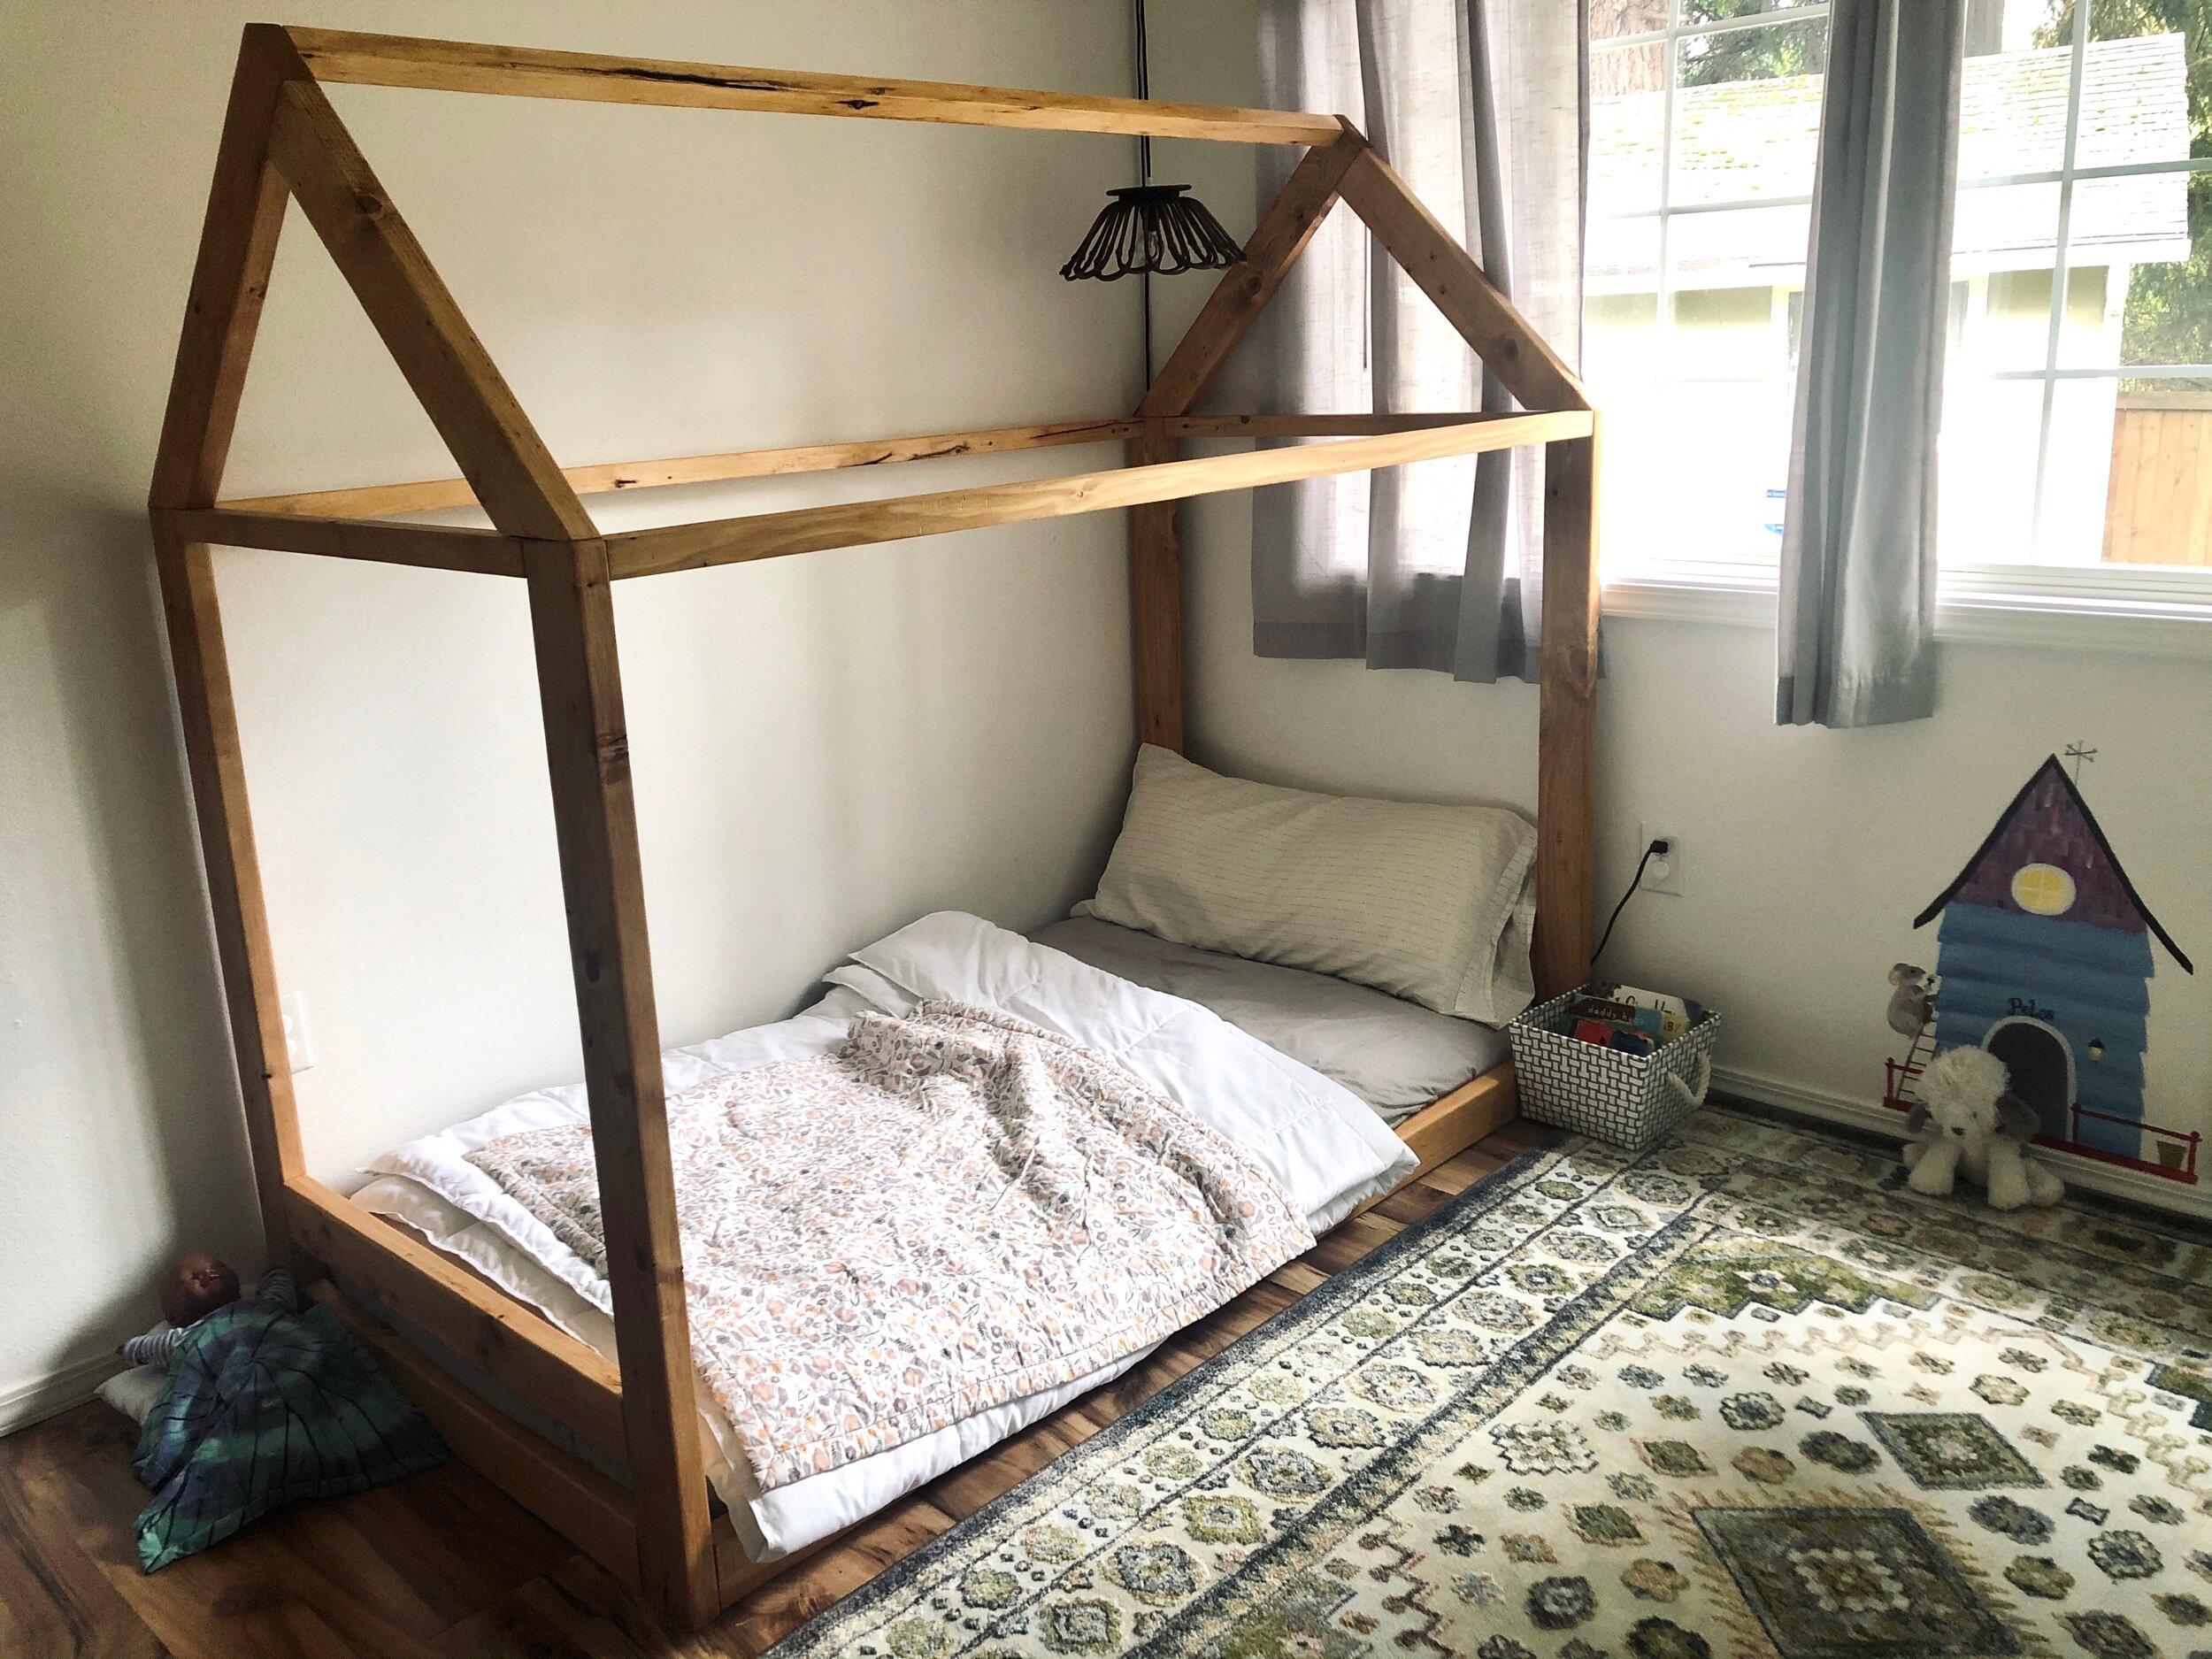 Building A House Bed Frame Curating, Diy House Bed Frame